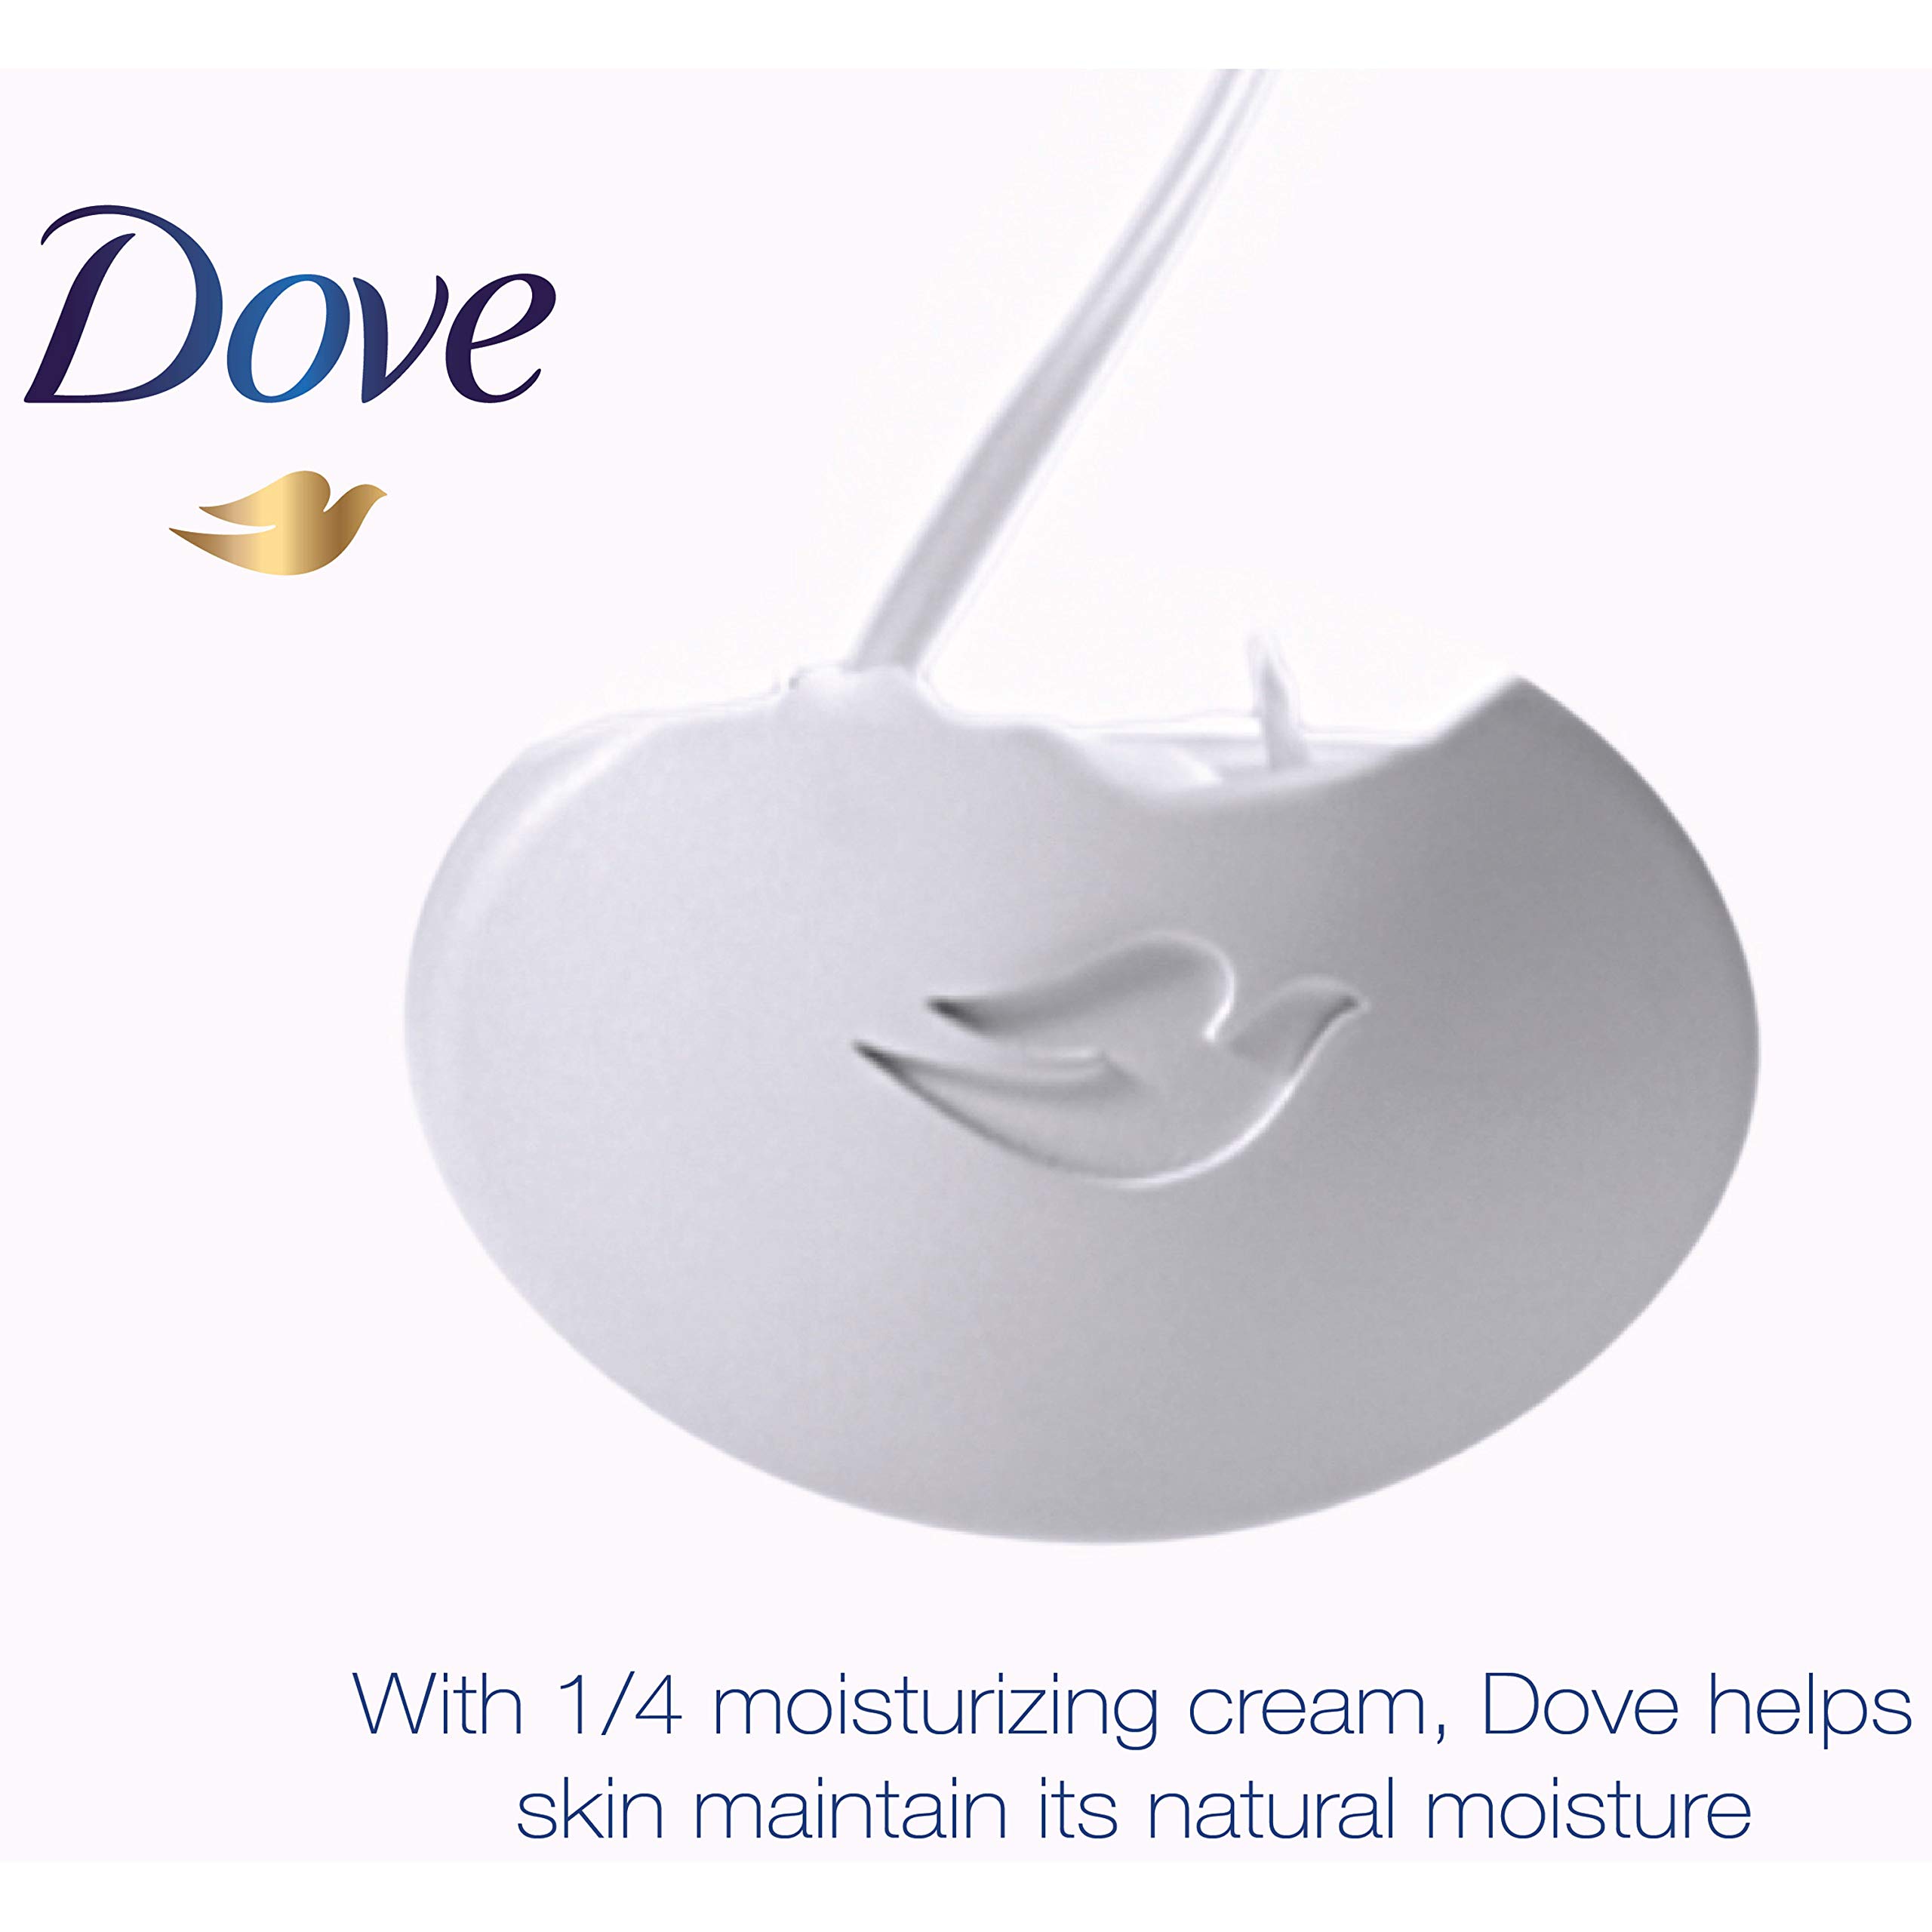 Dove Beauty Bar More Moisturizing than Bar Soap White Effectively Washes Away Bacteria, Nourishes Your Skin 3.75 oz 20 Bars